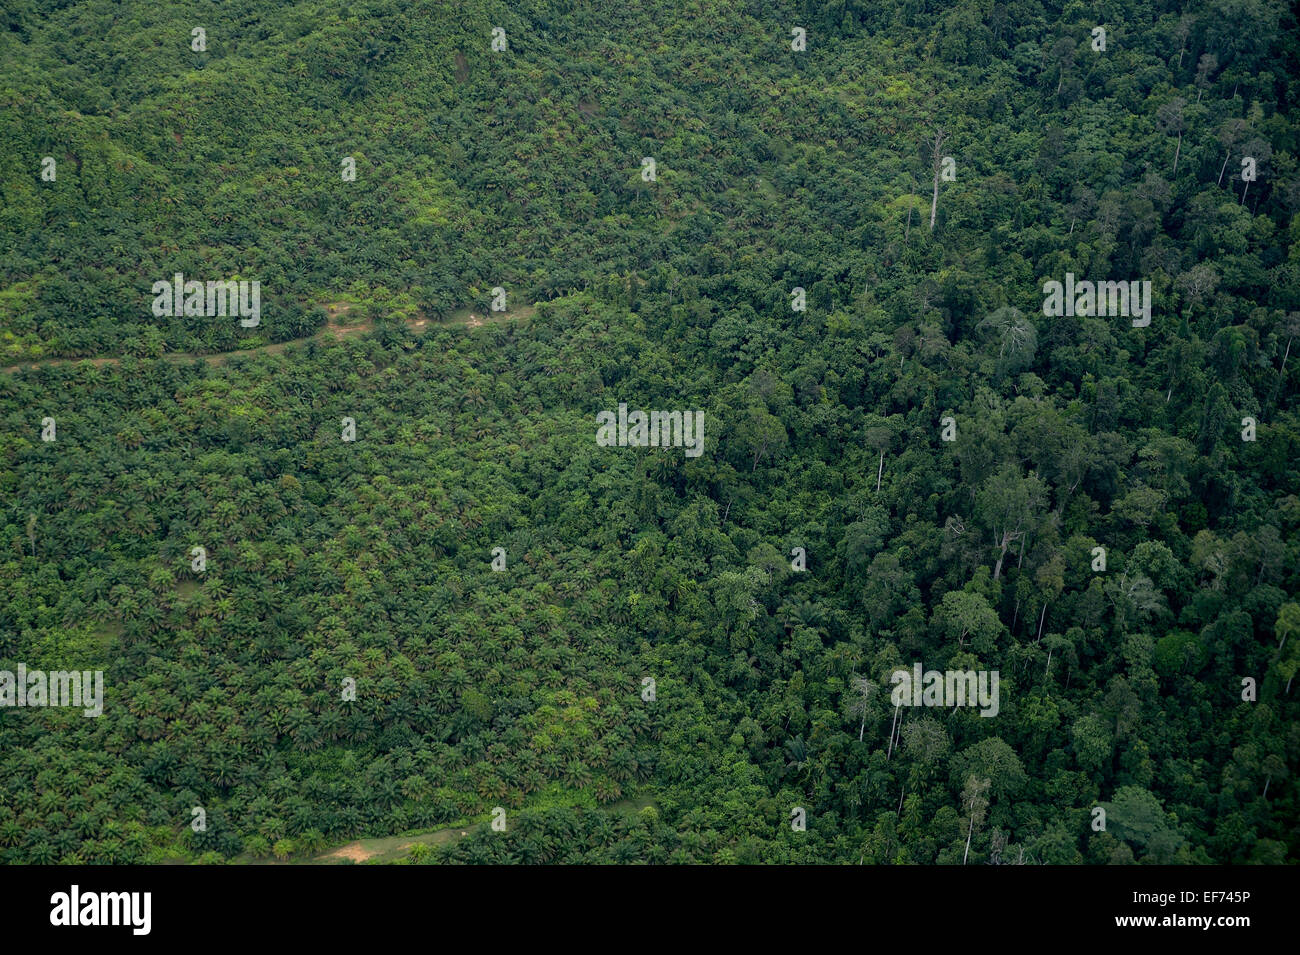 Plantation of oil palms (Elaeis guineensis) for the production of palm oil in the rainforest, aerial view, Simeulue, Indonesia Stock Photo